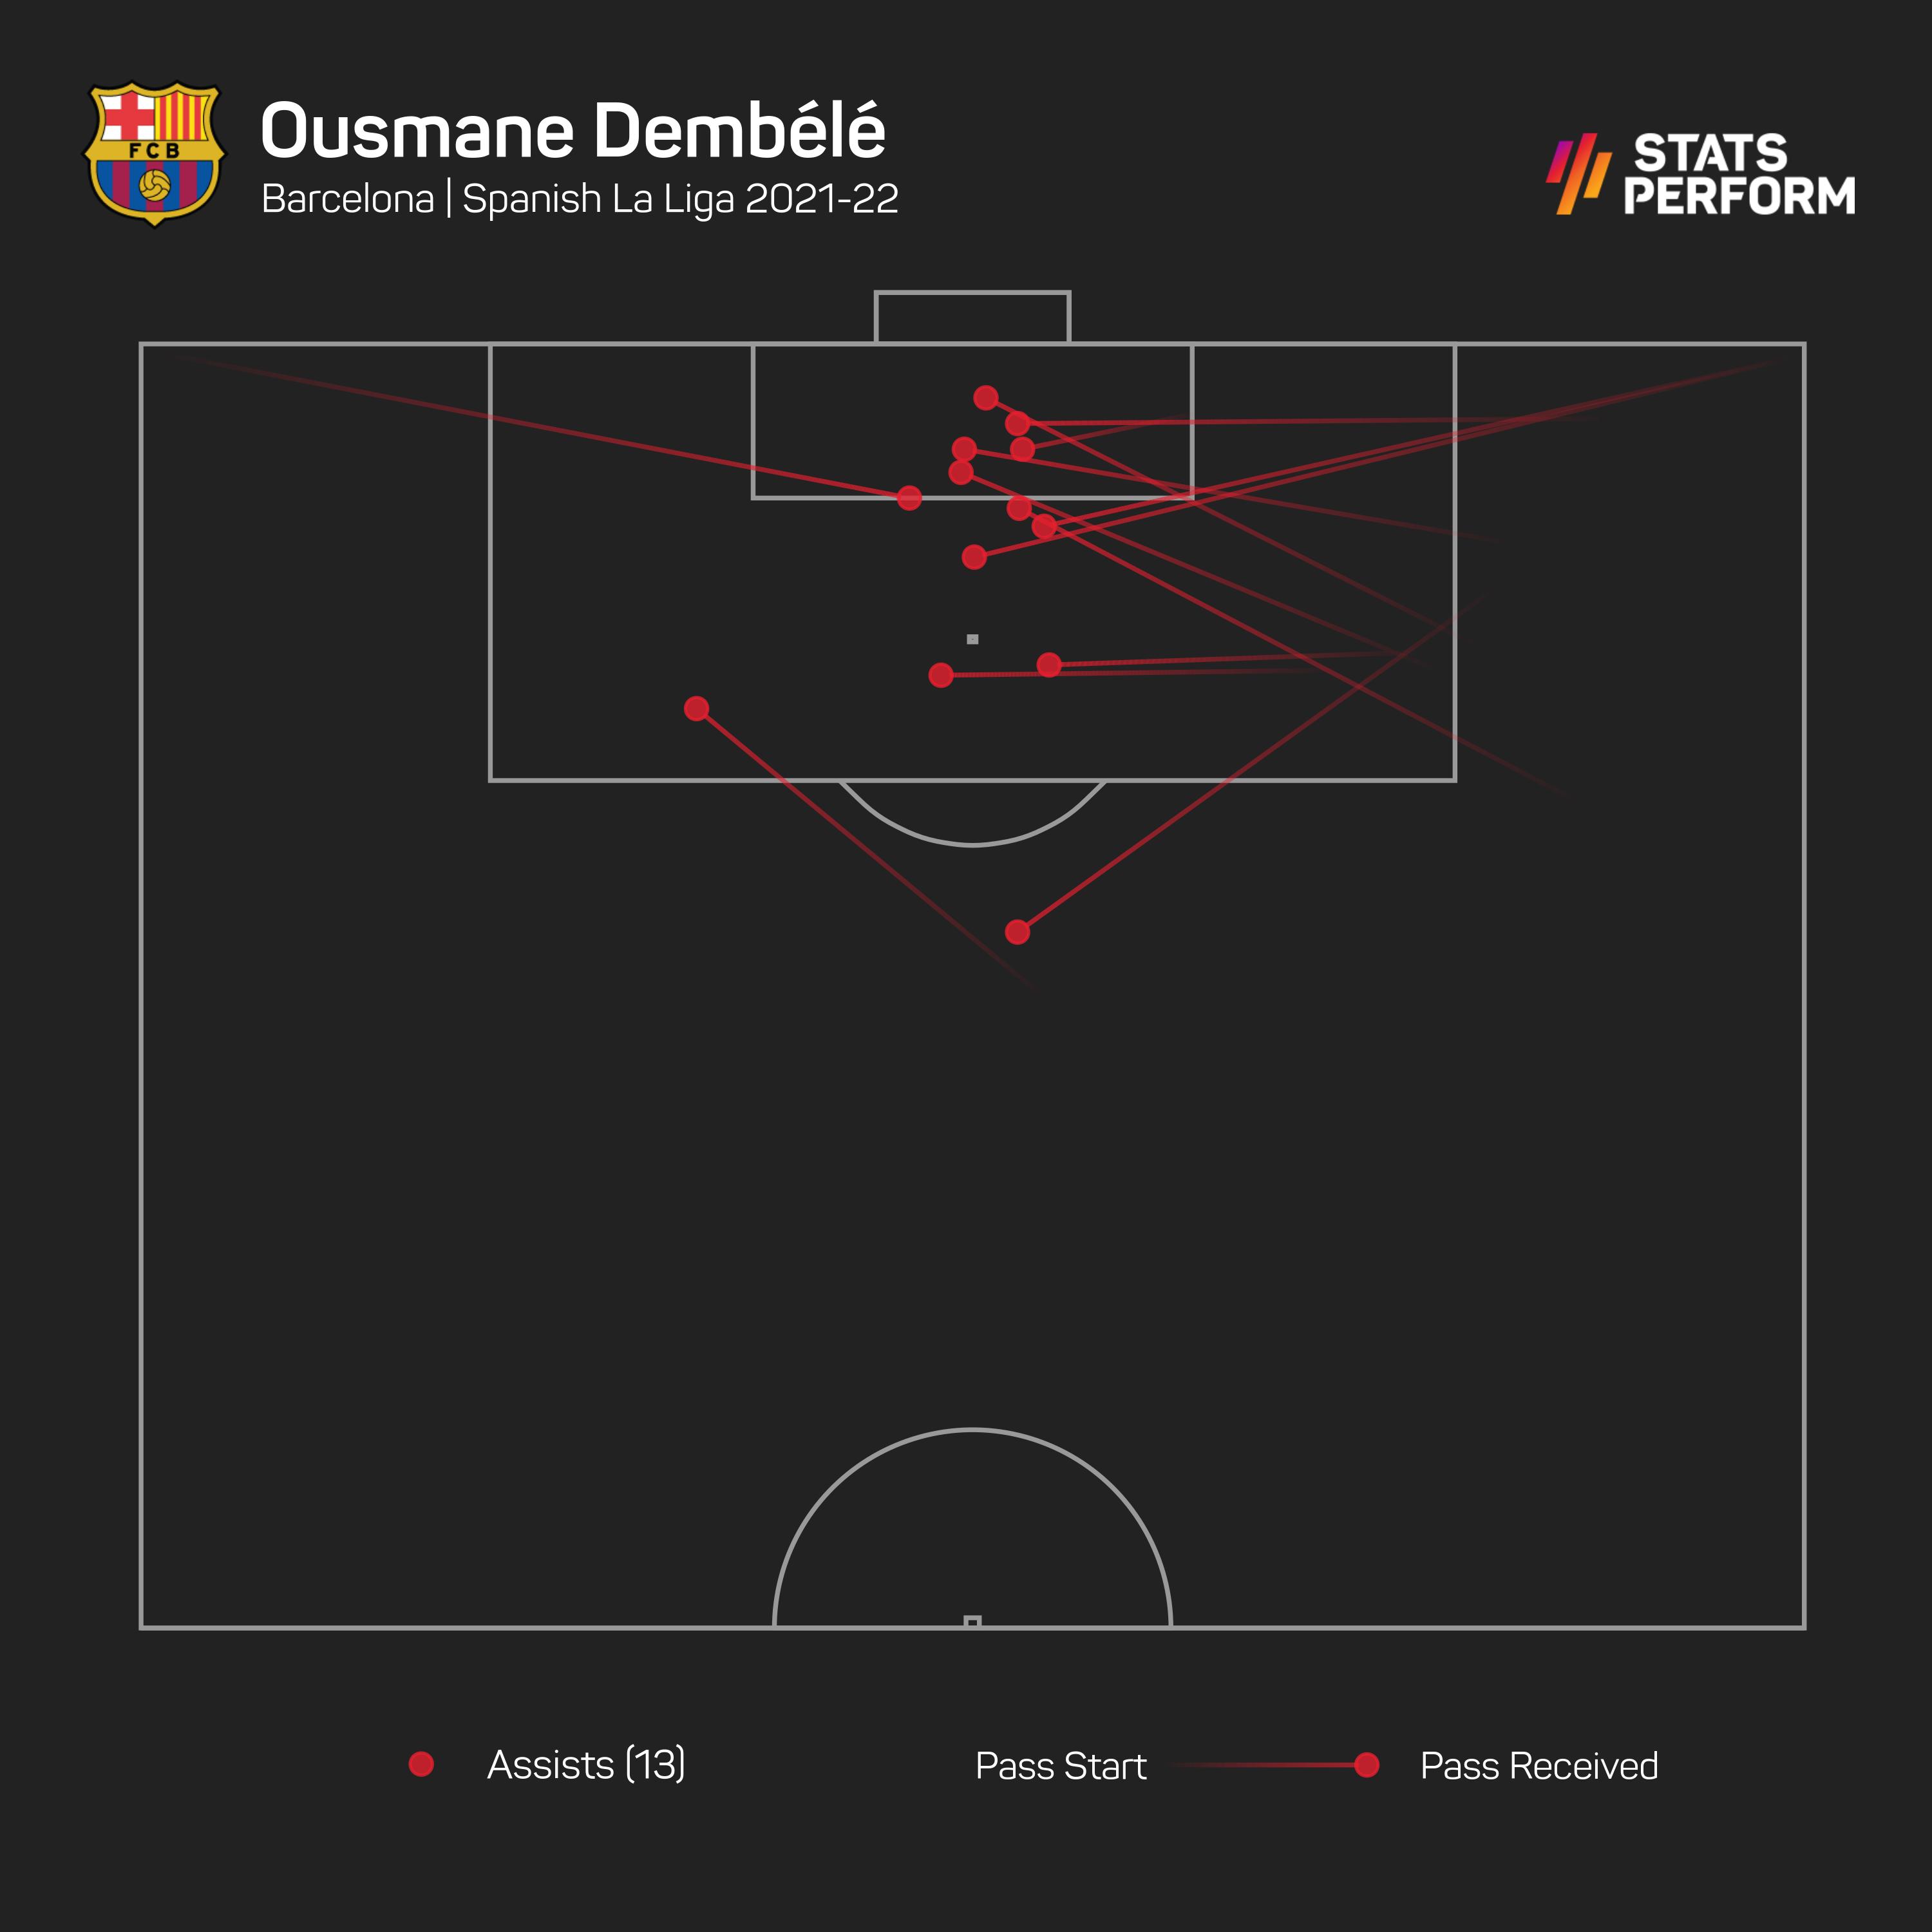 Ousmane Dembele's LaLiga assists in 2021-22